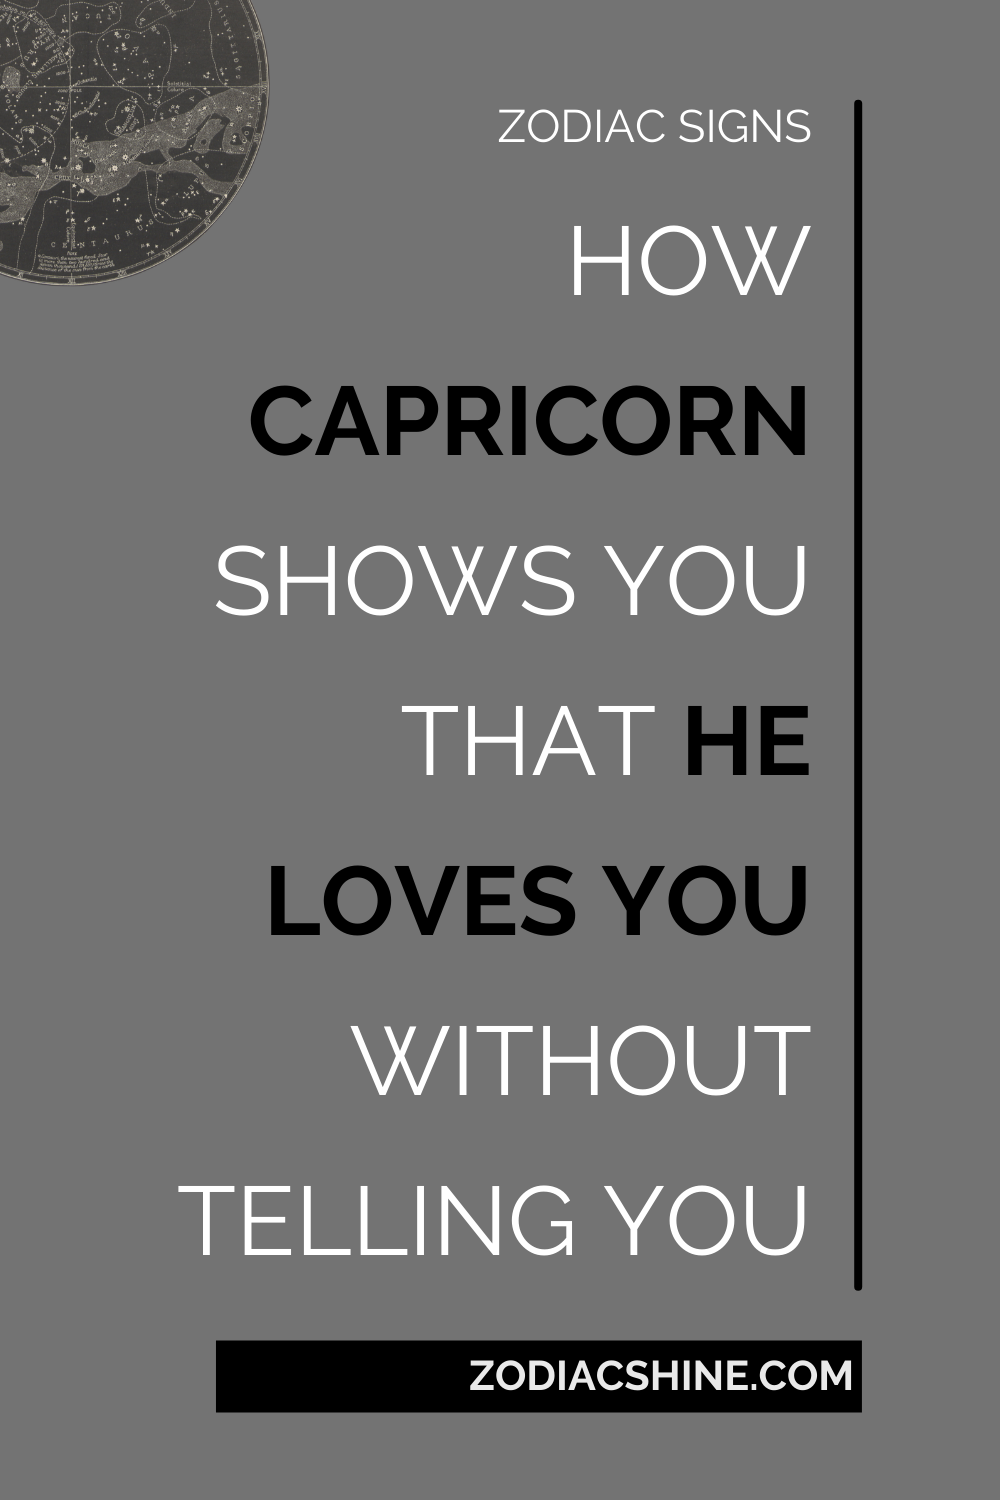 How Capricorn Shows You That He Loves You Without Telling You